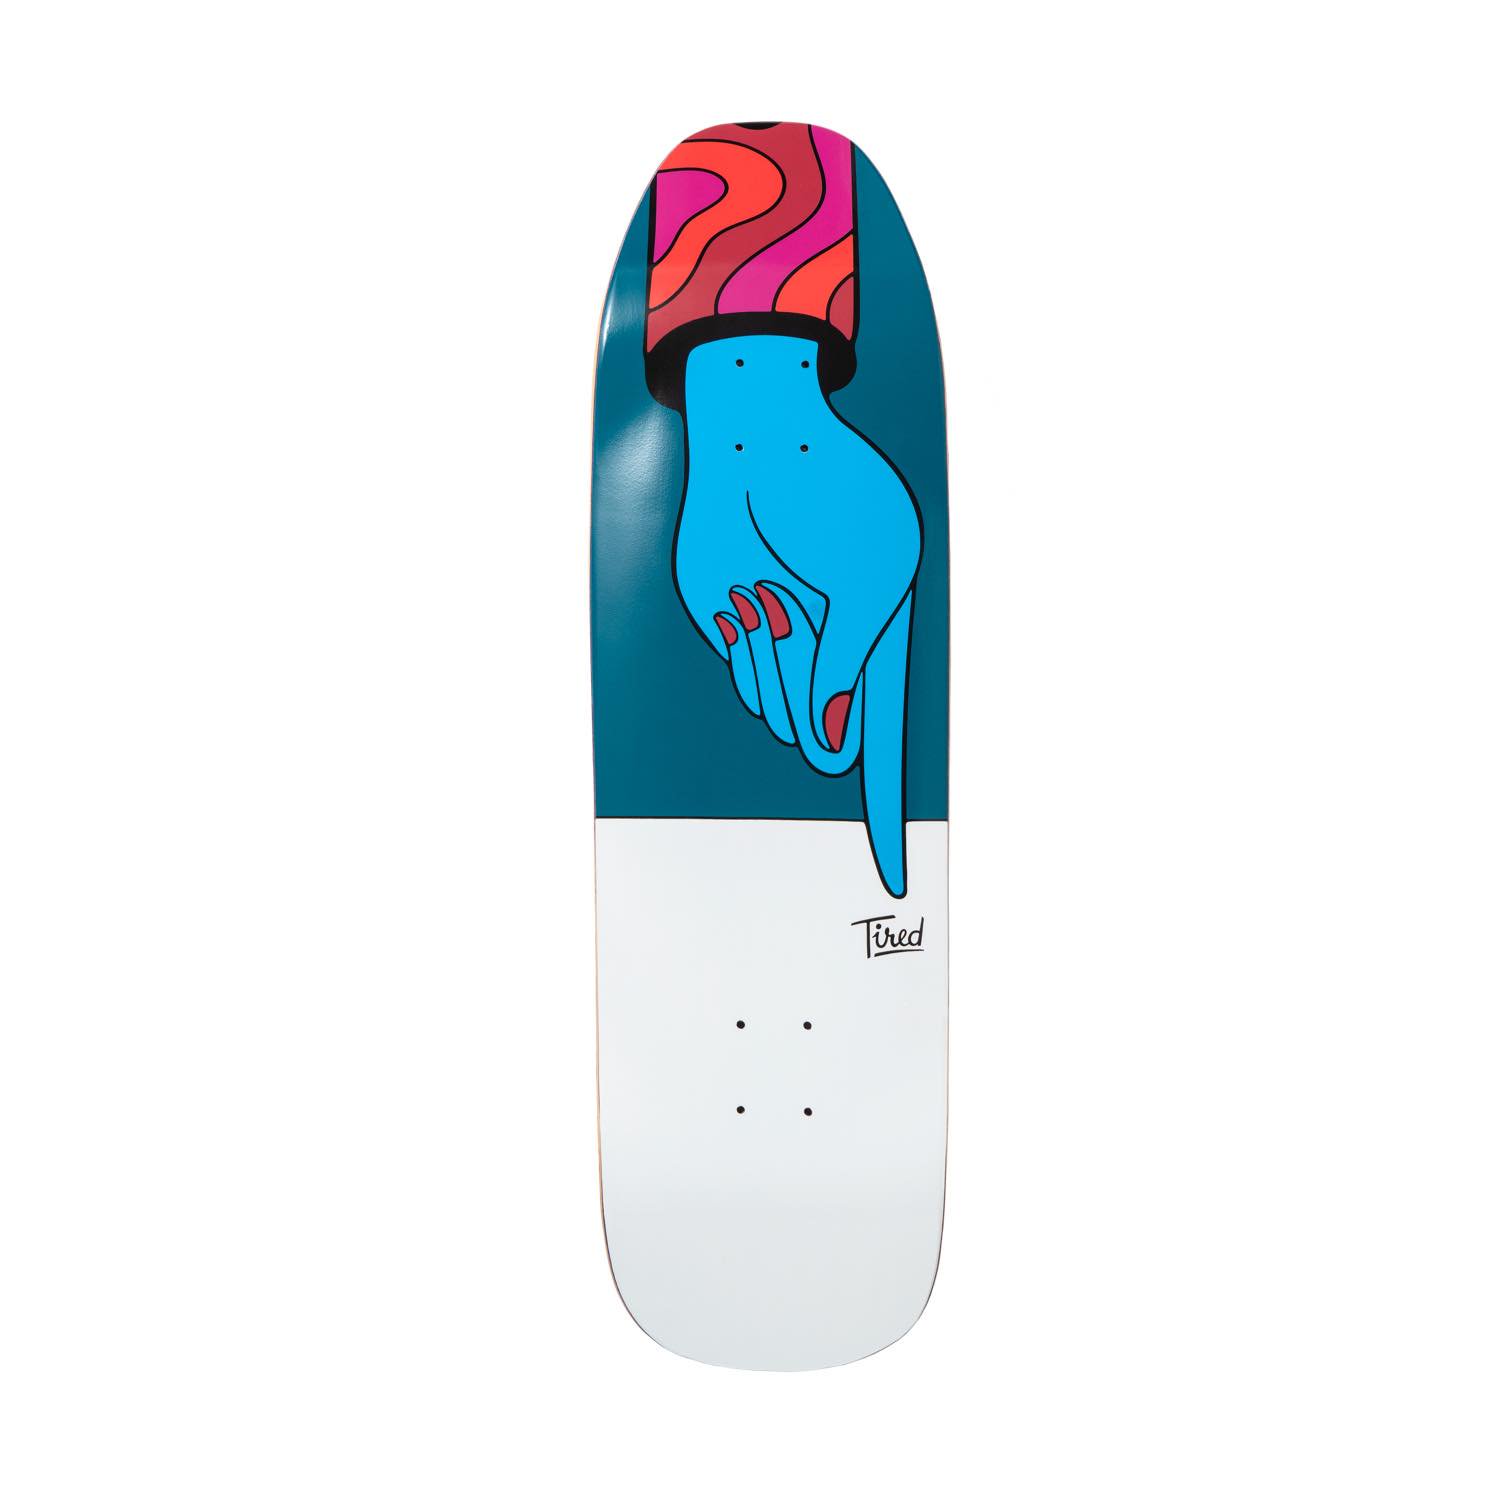 <img class='new_mark_img1' src='https://img.shop-pro.jp/img/new/icons20.gif' style='border:none;display:inline;margin:0px;padding:0px;width:auto;' />Tired タイレッド / FINGER SKATEBOARD/STUMPNOSE